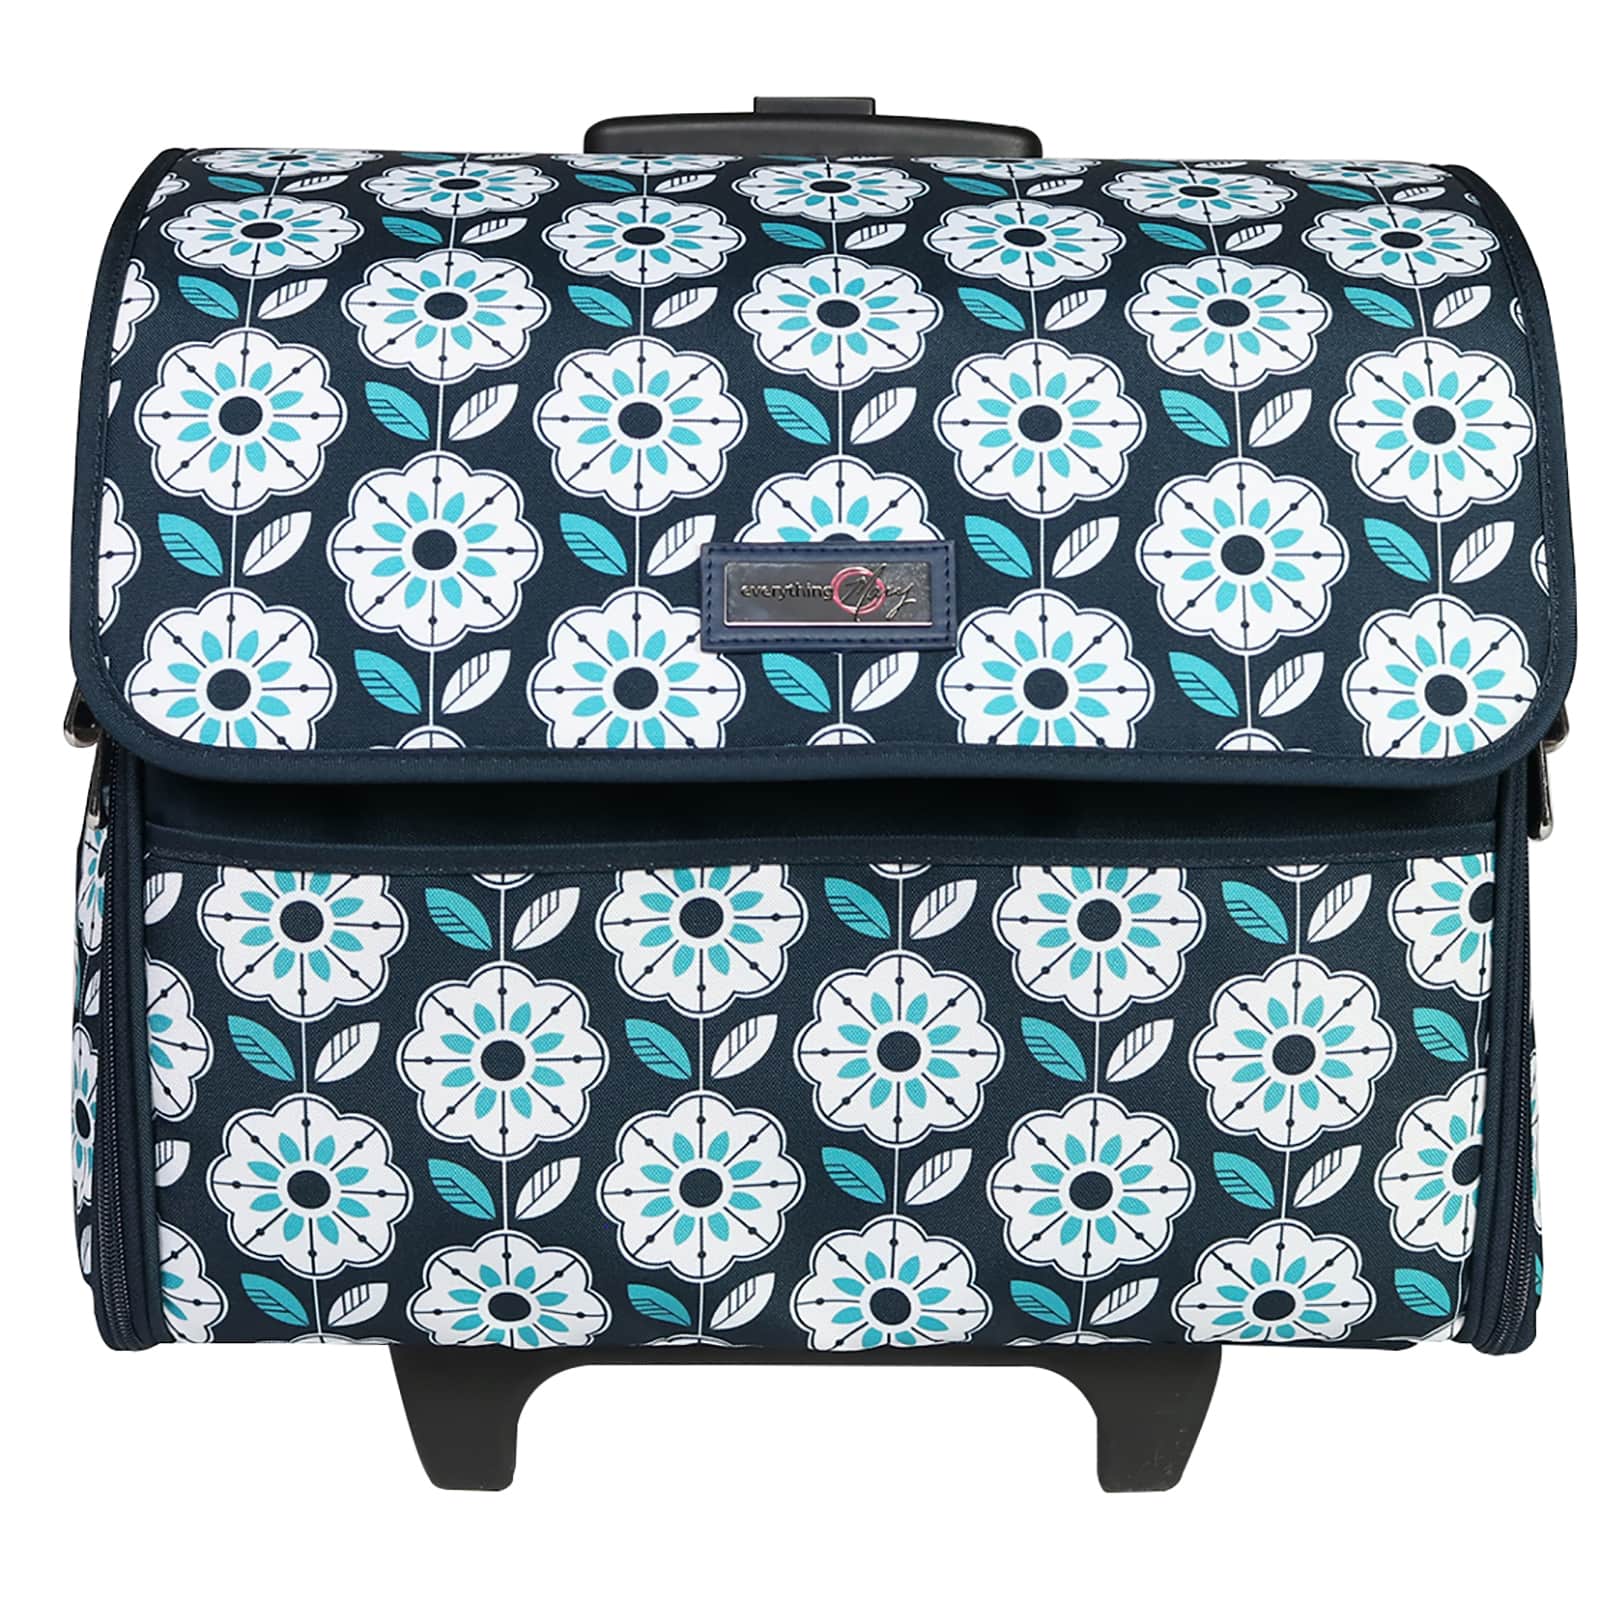 Sewing Machine Rolling Tote Blue Floral - 812259037177